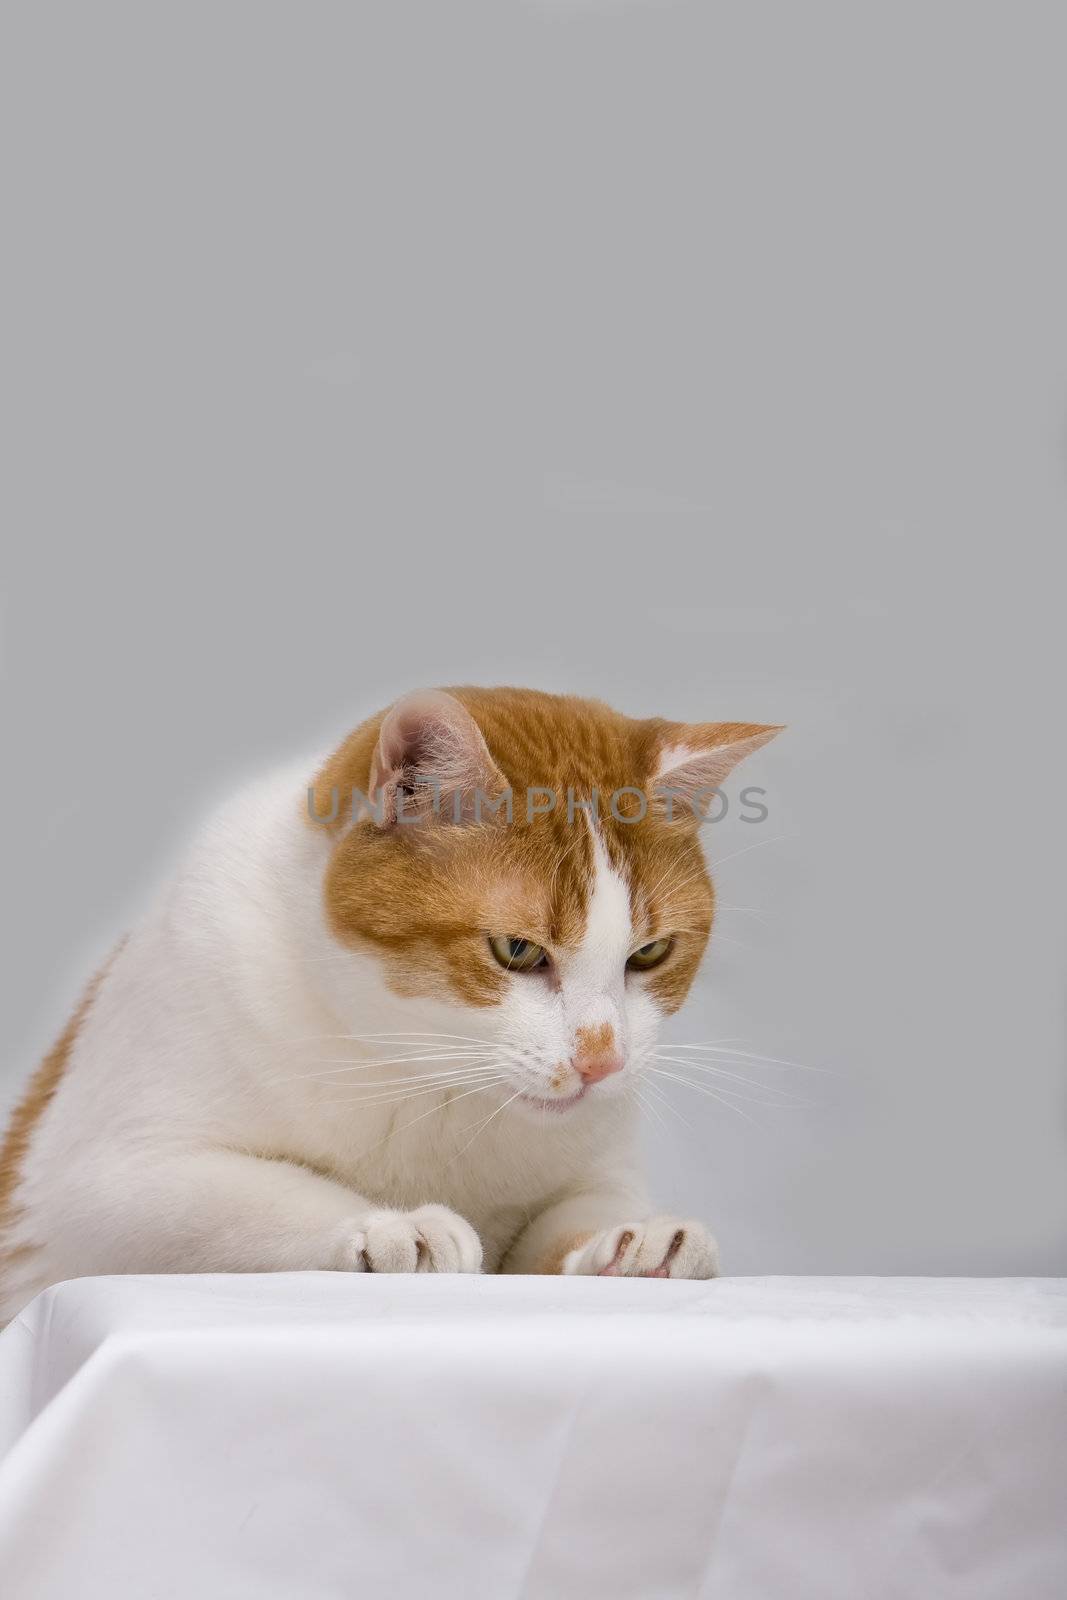 An orange cat curious to see what is on a white table, isolated on grey